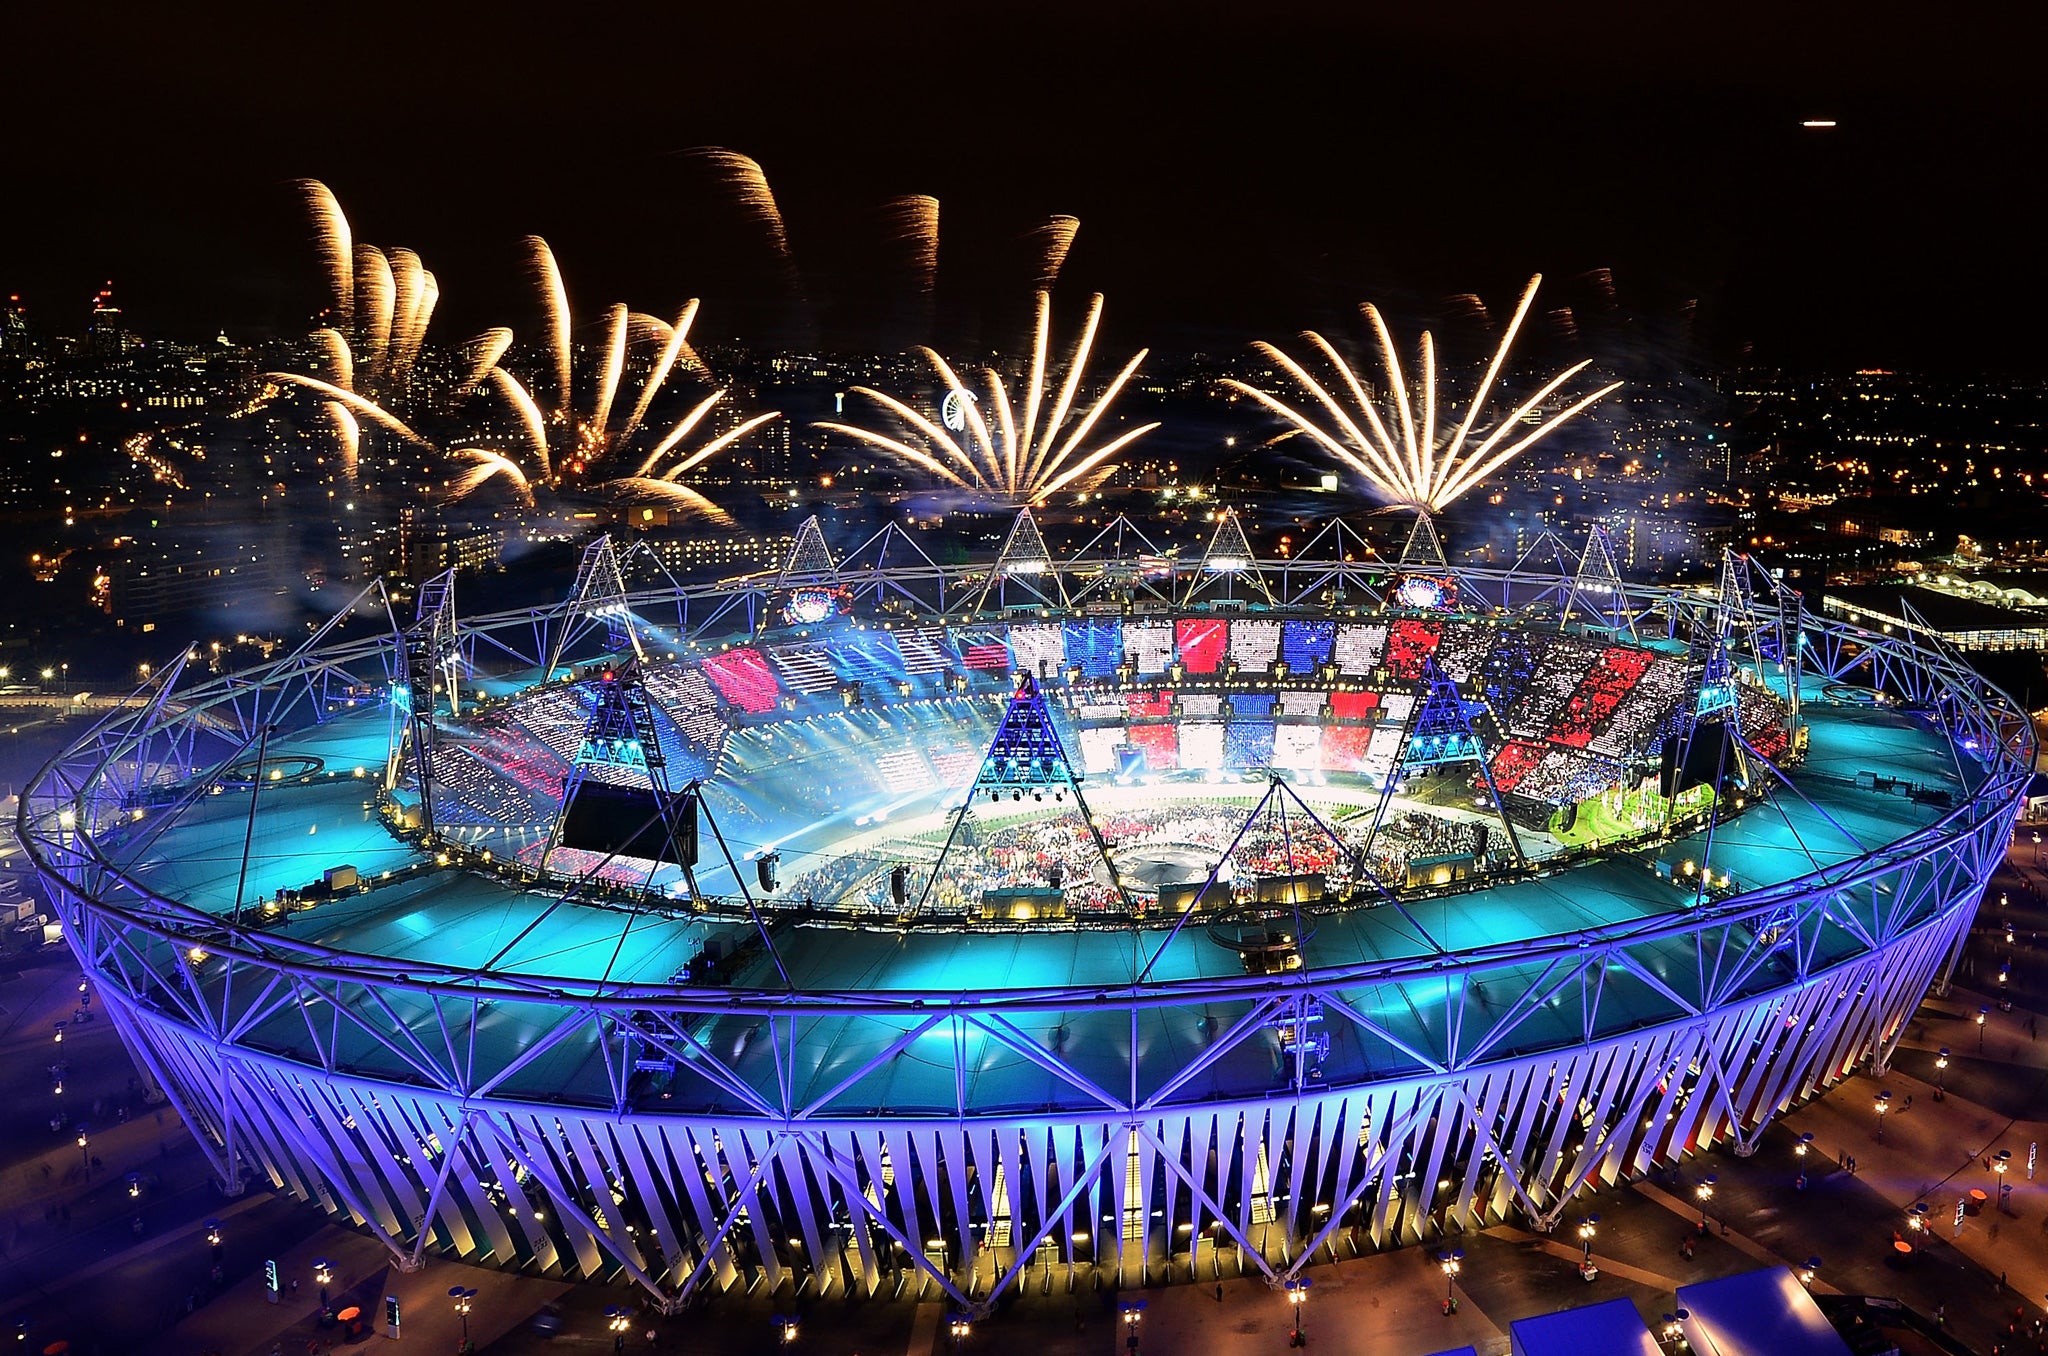 The Olympic opening ceremony